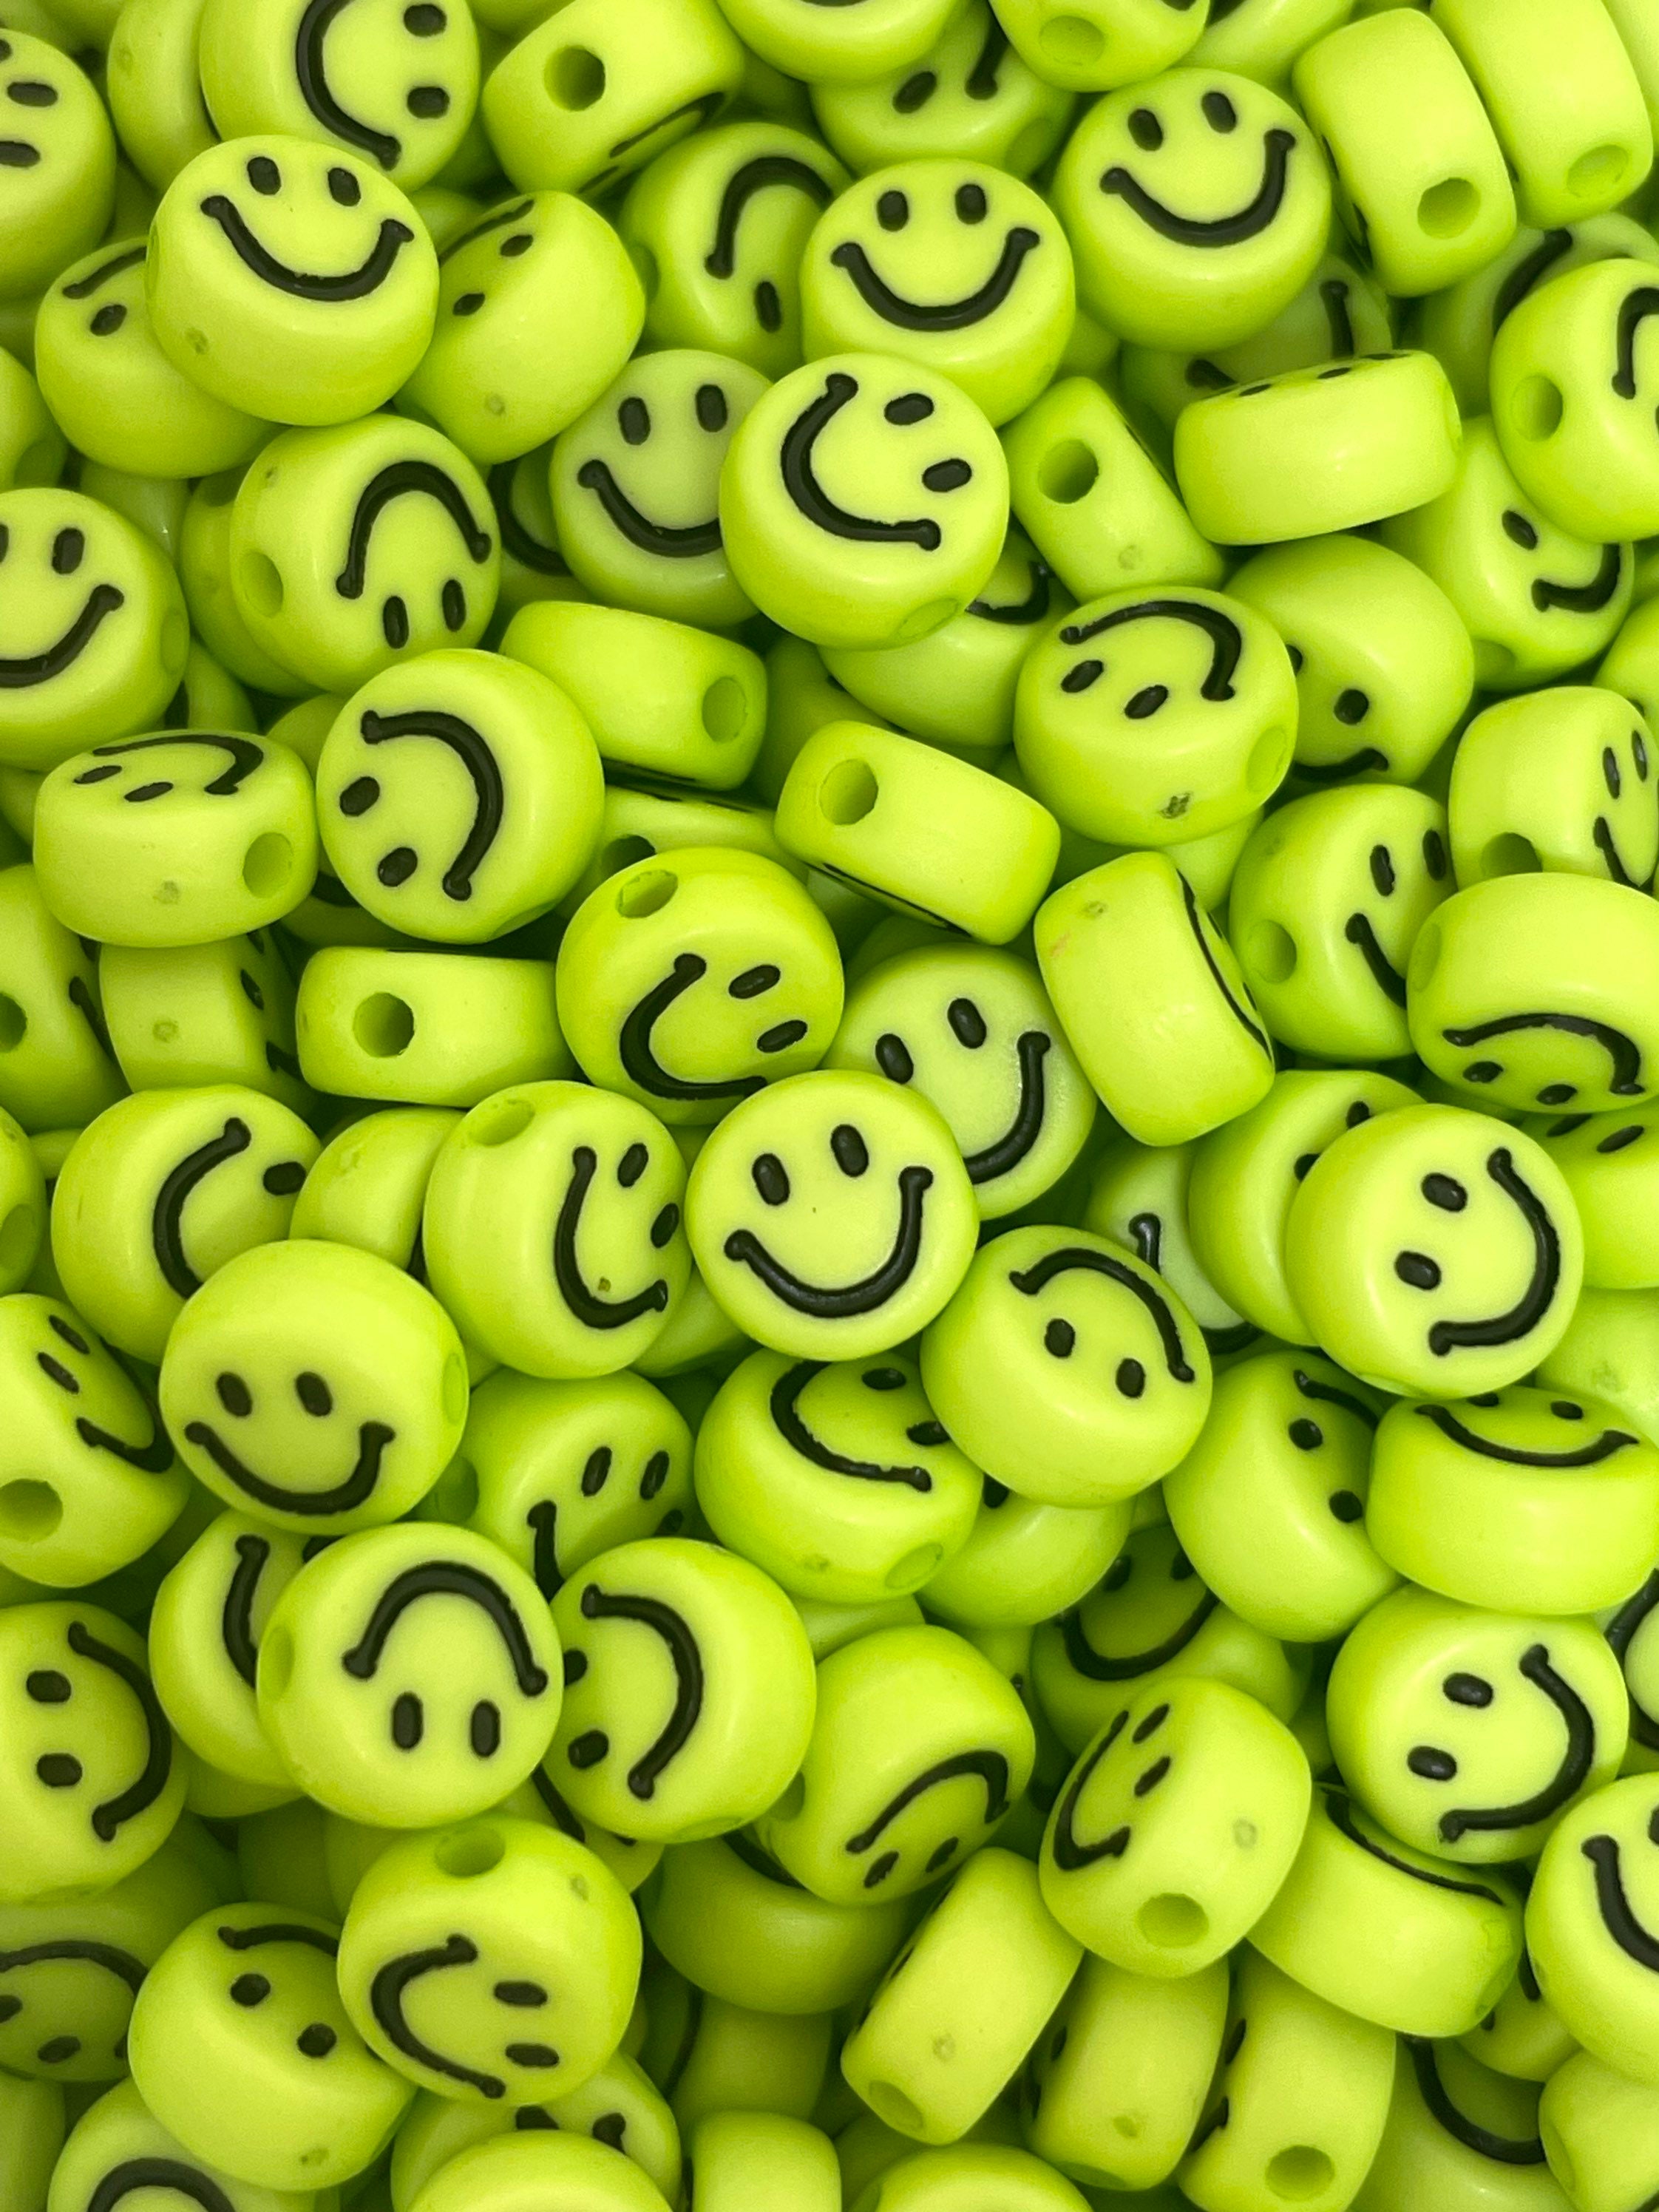 Pastel Happy Face Clay Beads, Smiley Face Emoji Beads, Polymer Clay  Handmade Charm, Pendant -  Norway